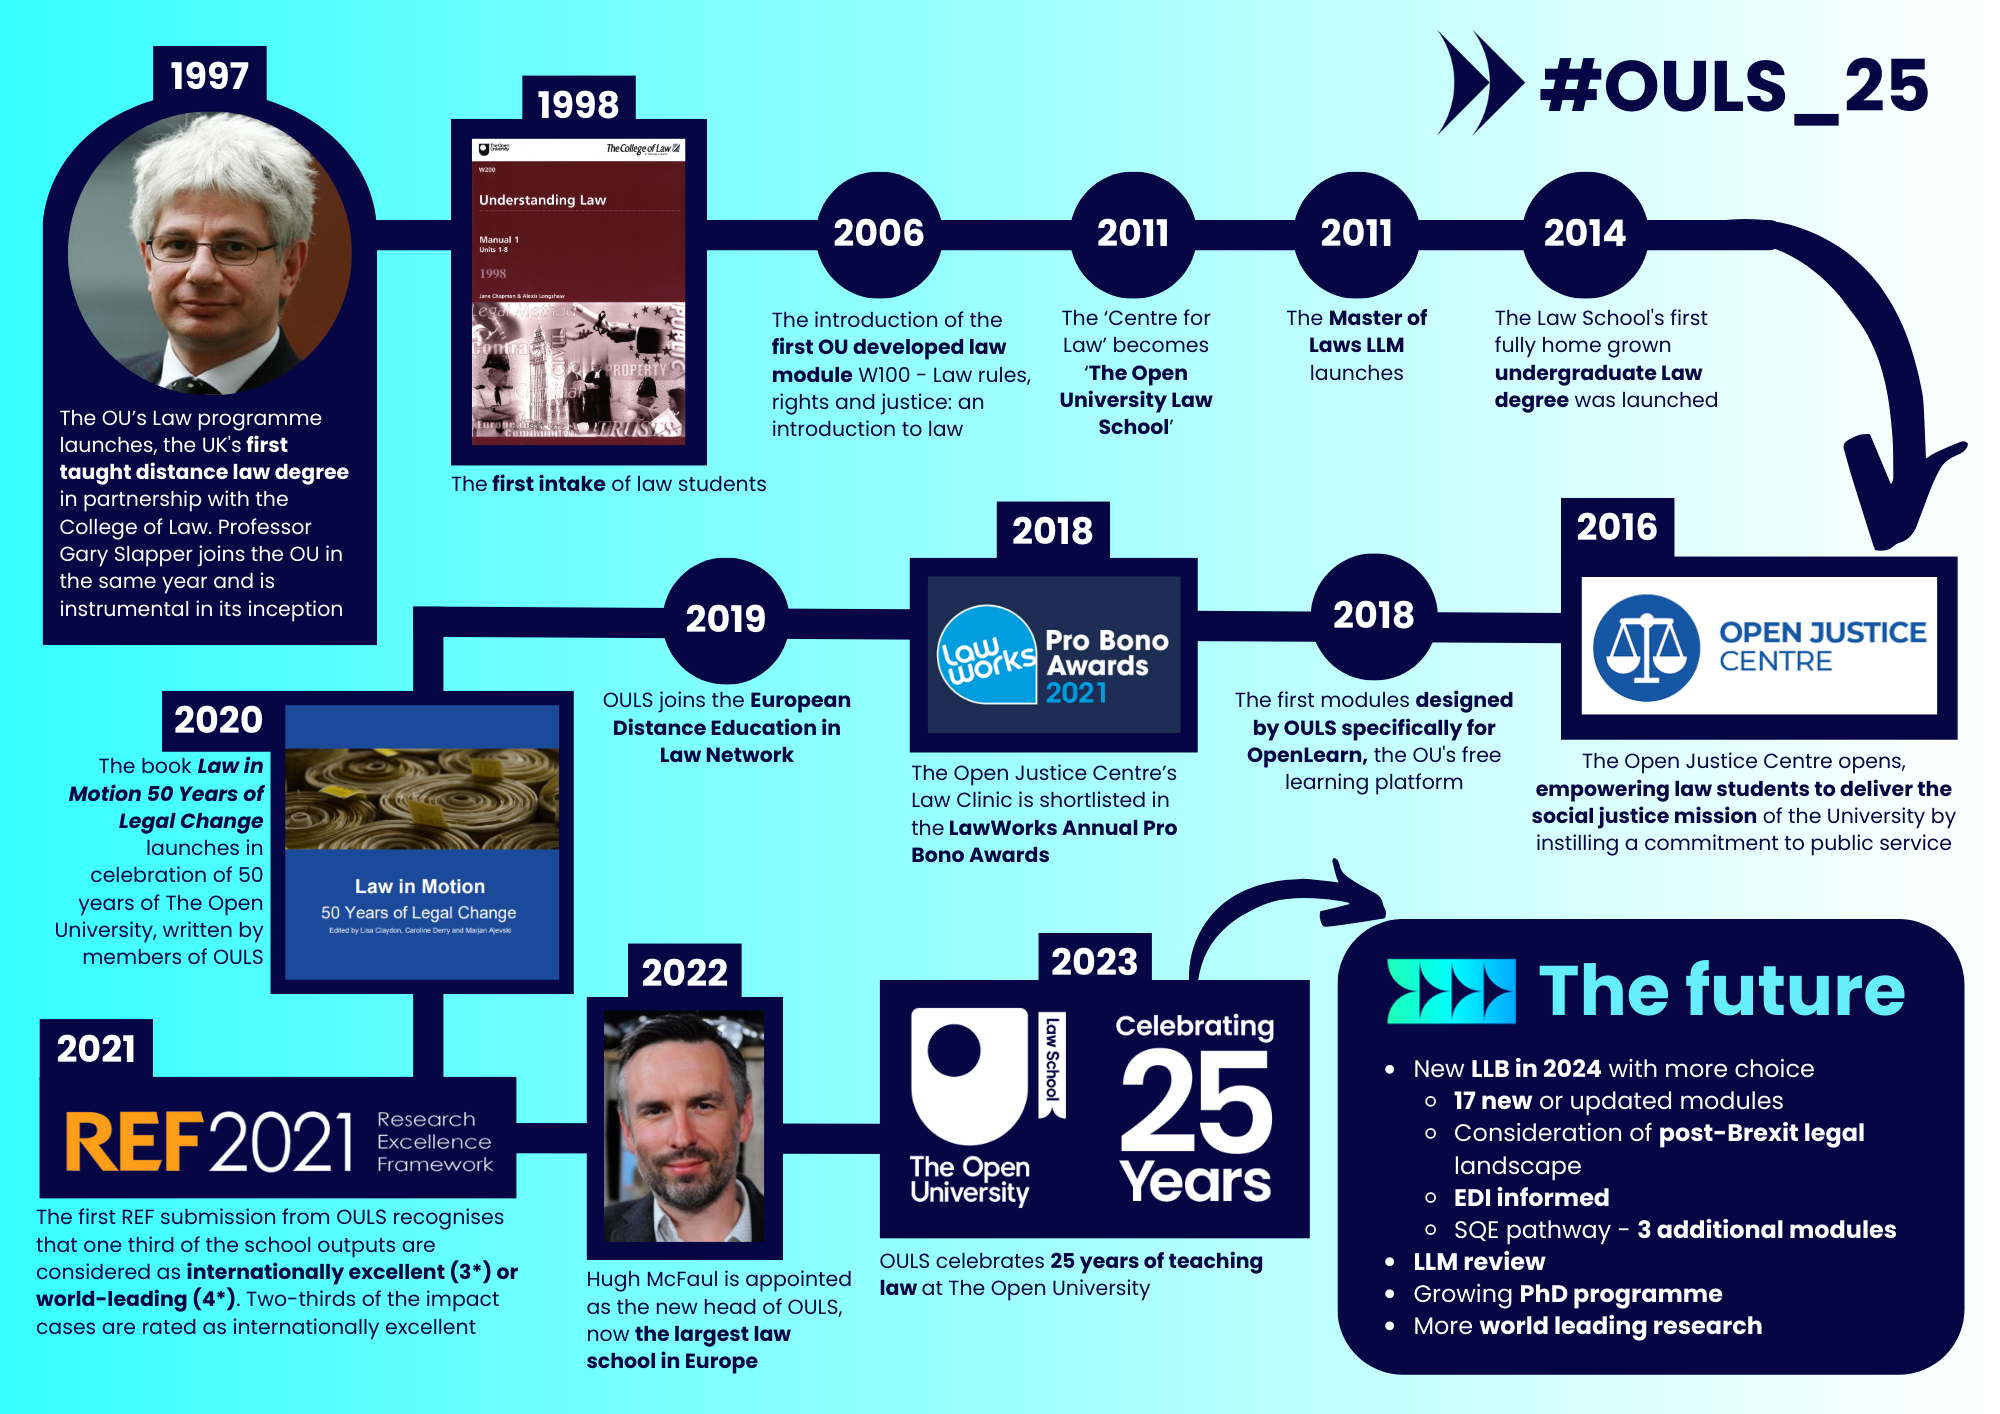  25 more years of excellence from The Open University Law School. Finally, the #OULS_25 hashtag is shown in the bottom left-hand corner.